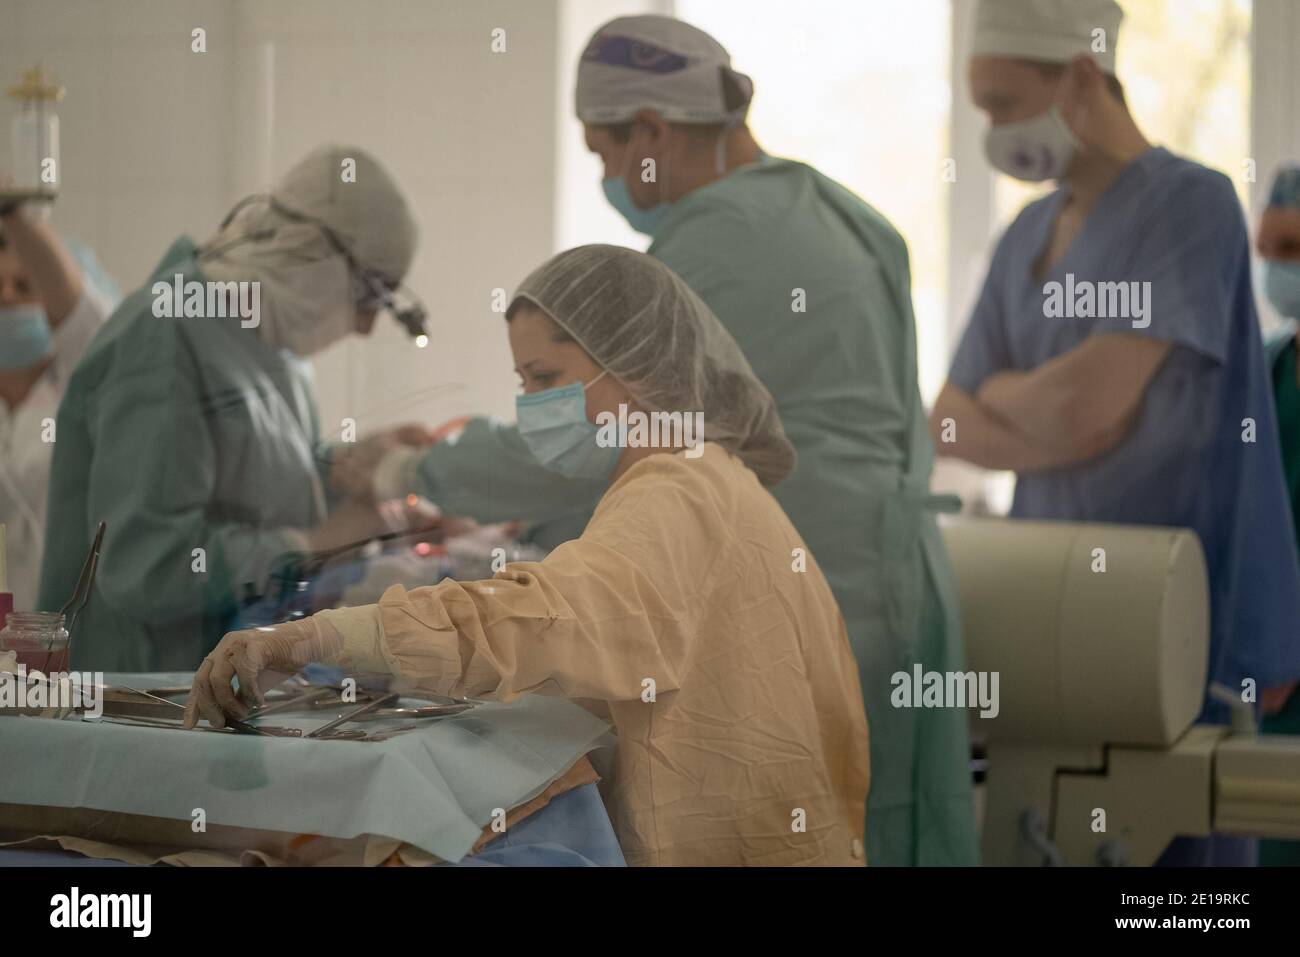 Doctors and nurses perform an operation in an operating room. Team of medical workers wearing face masks and uniforms. City Hospital. May, 2020 Stock Photo